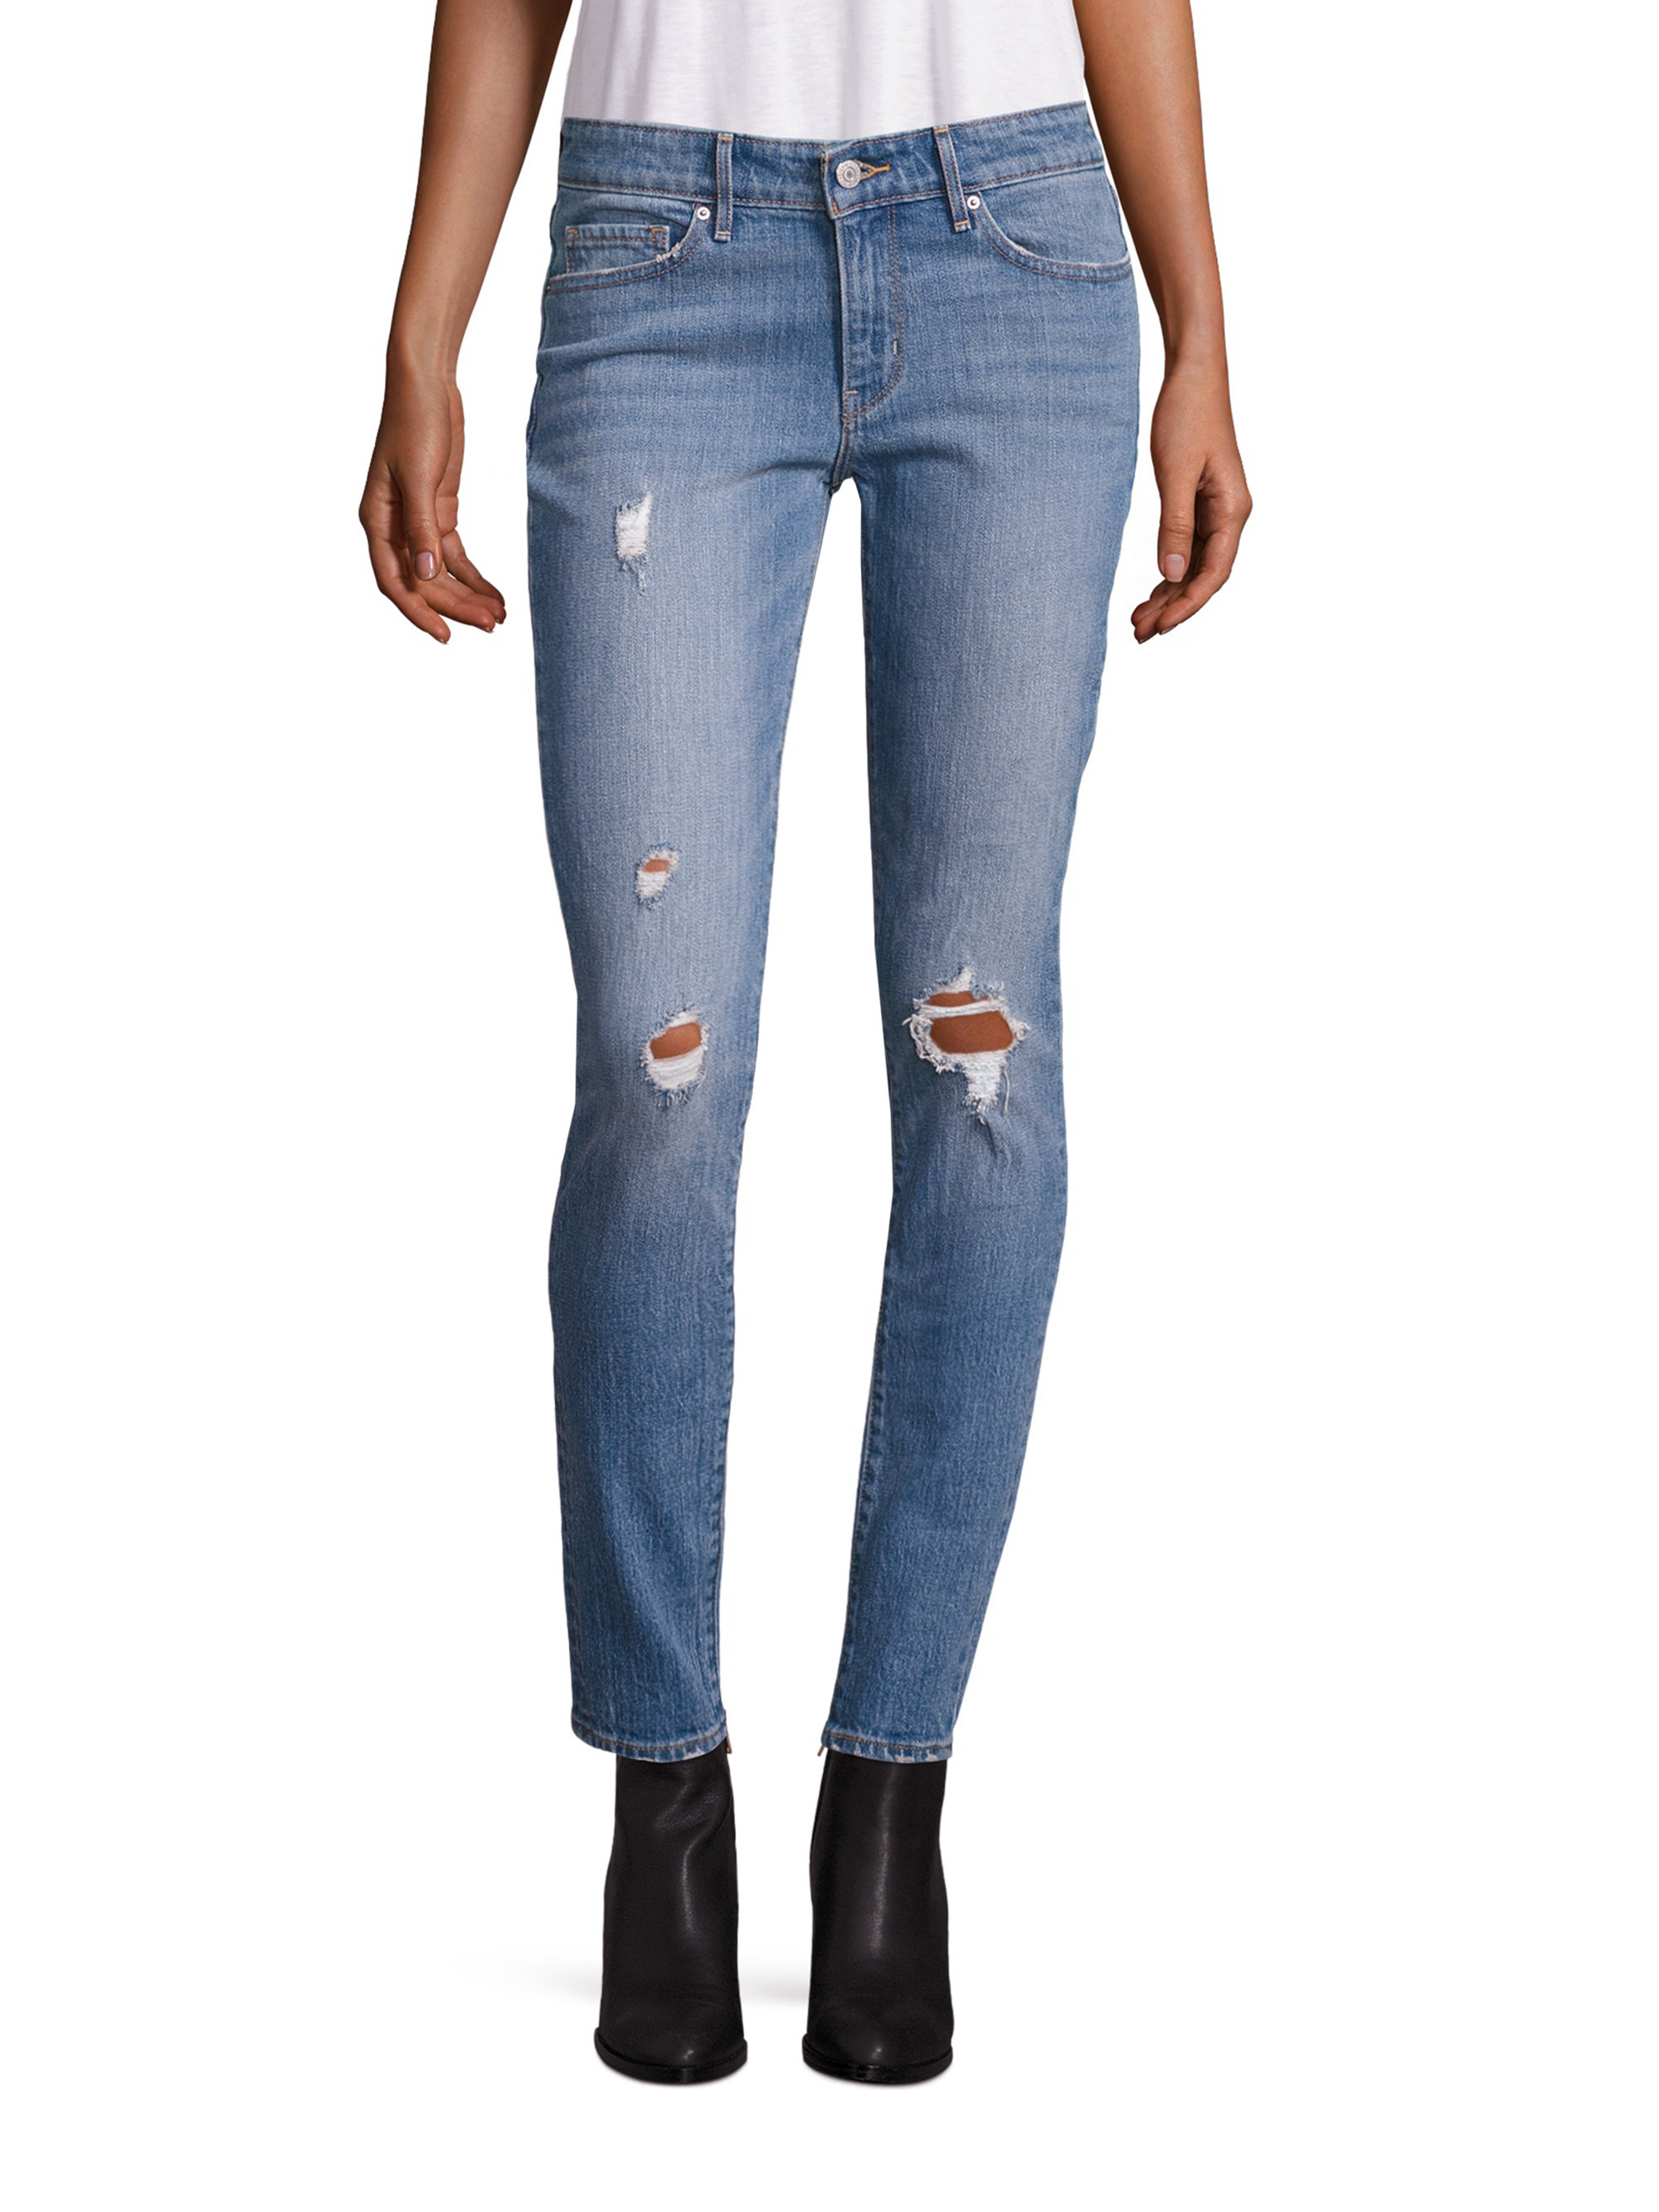 Levi's Denim 711 Distressed Mid-rise Skinny Jeans in Blue - Lyst